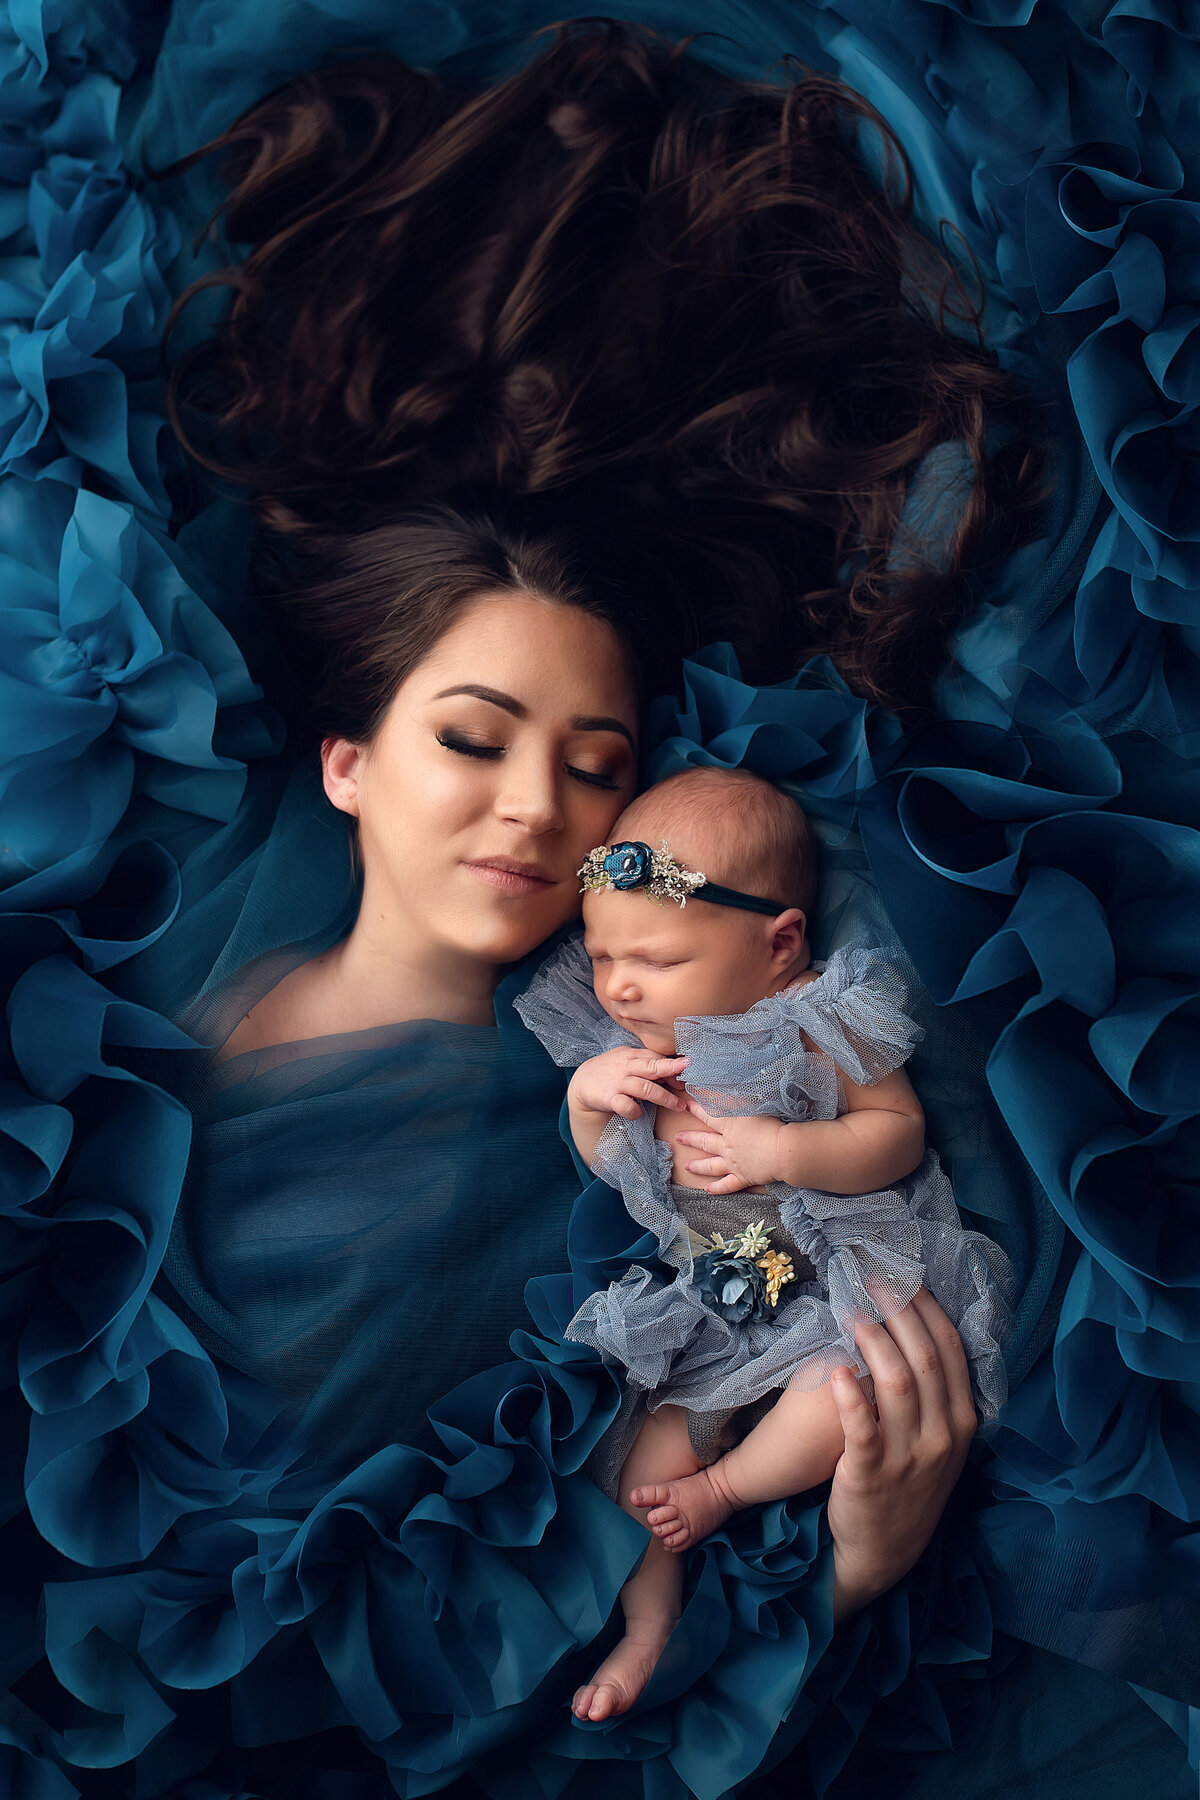 Portrait of mother and newborn daughter laying in a pile of teal ruffles.